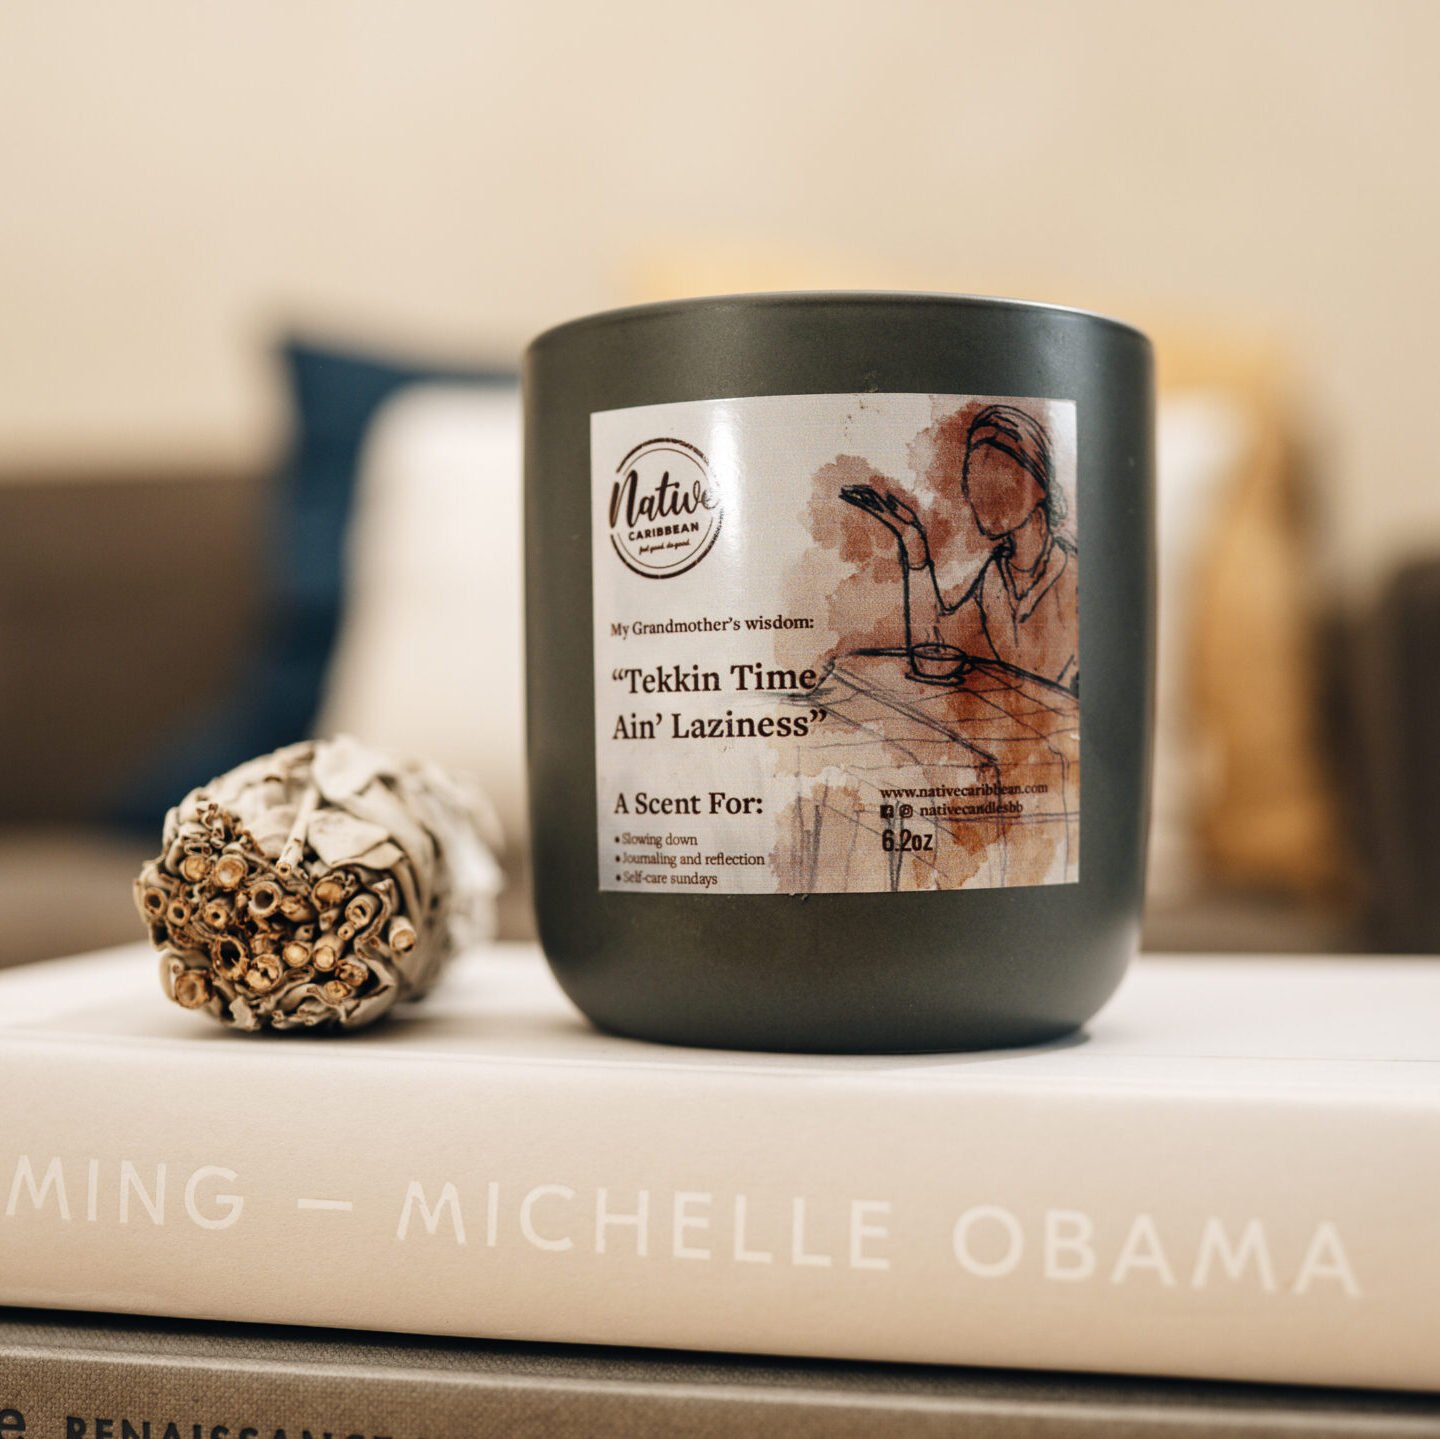 Candle and books - Native Caribbean's Tekkin' Time Ain' Laziness Candle